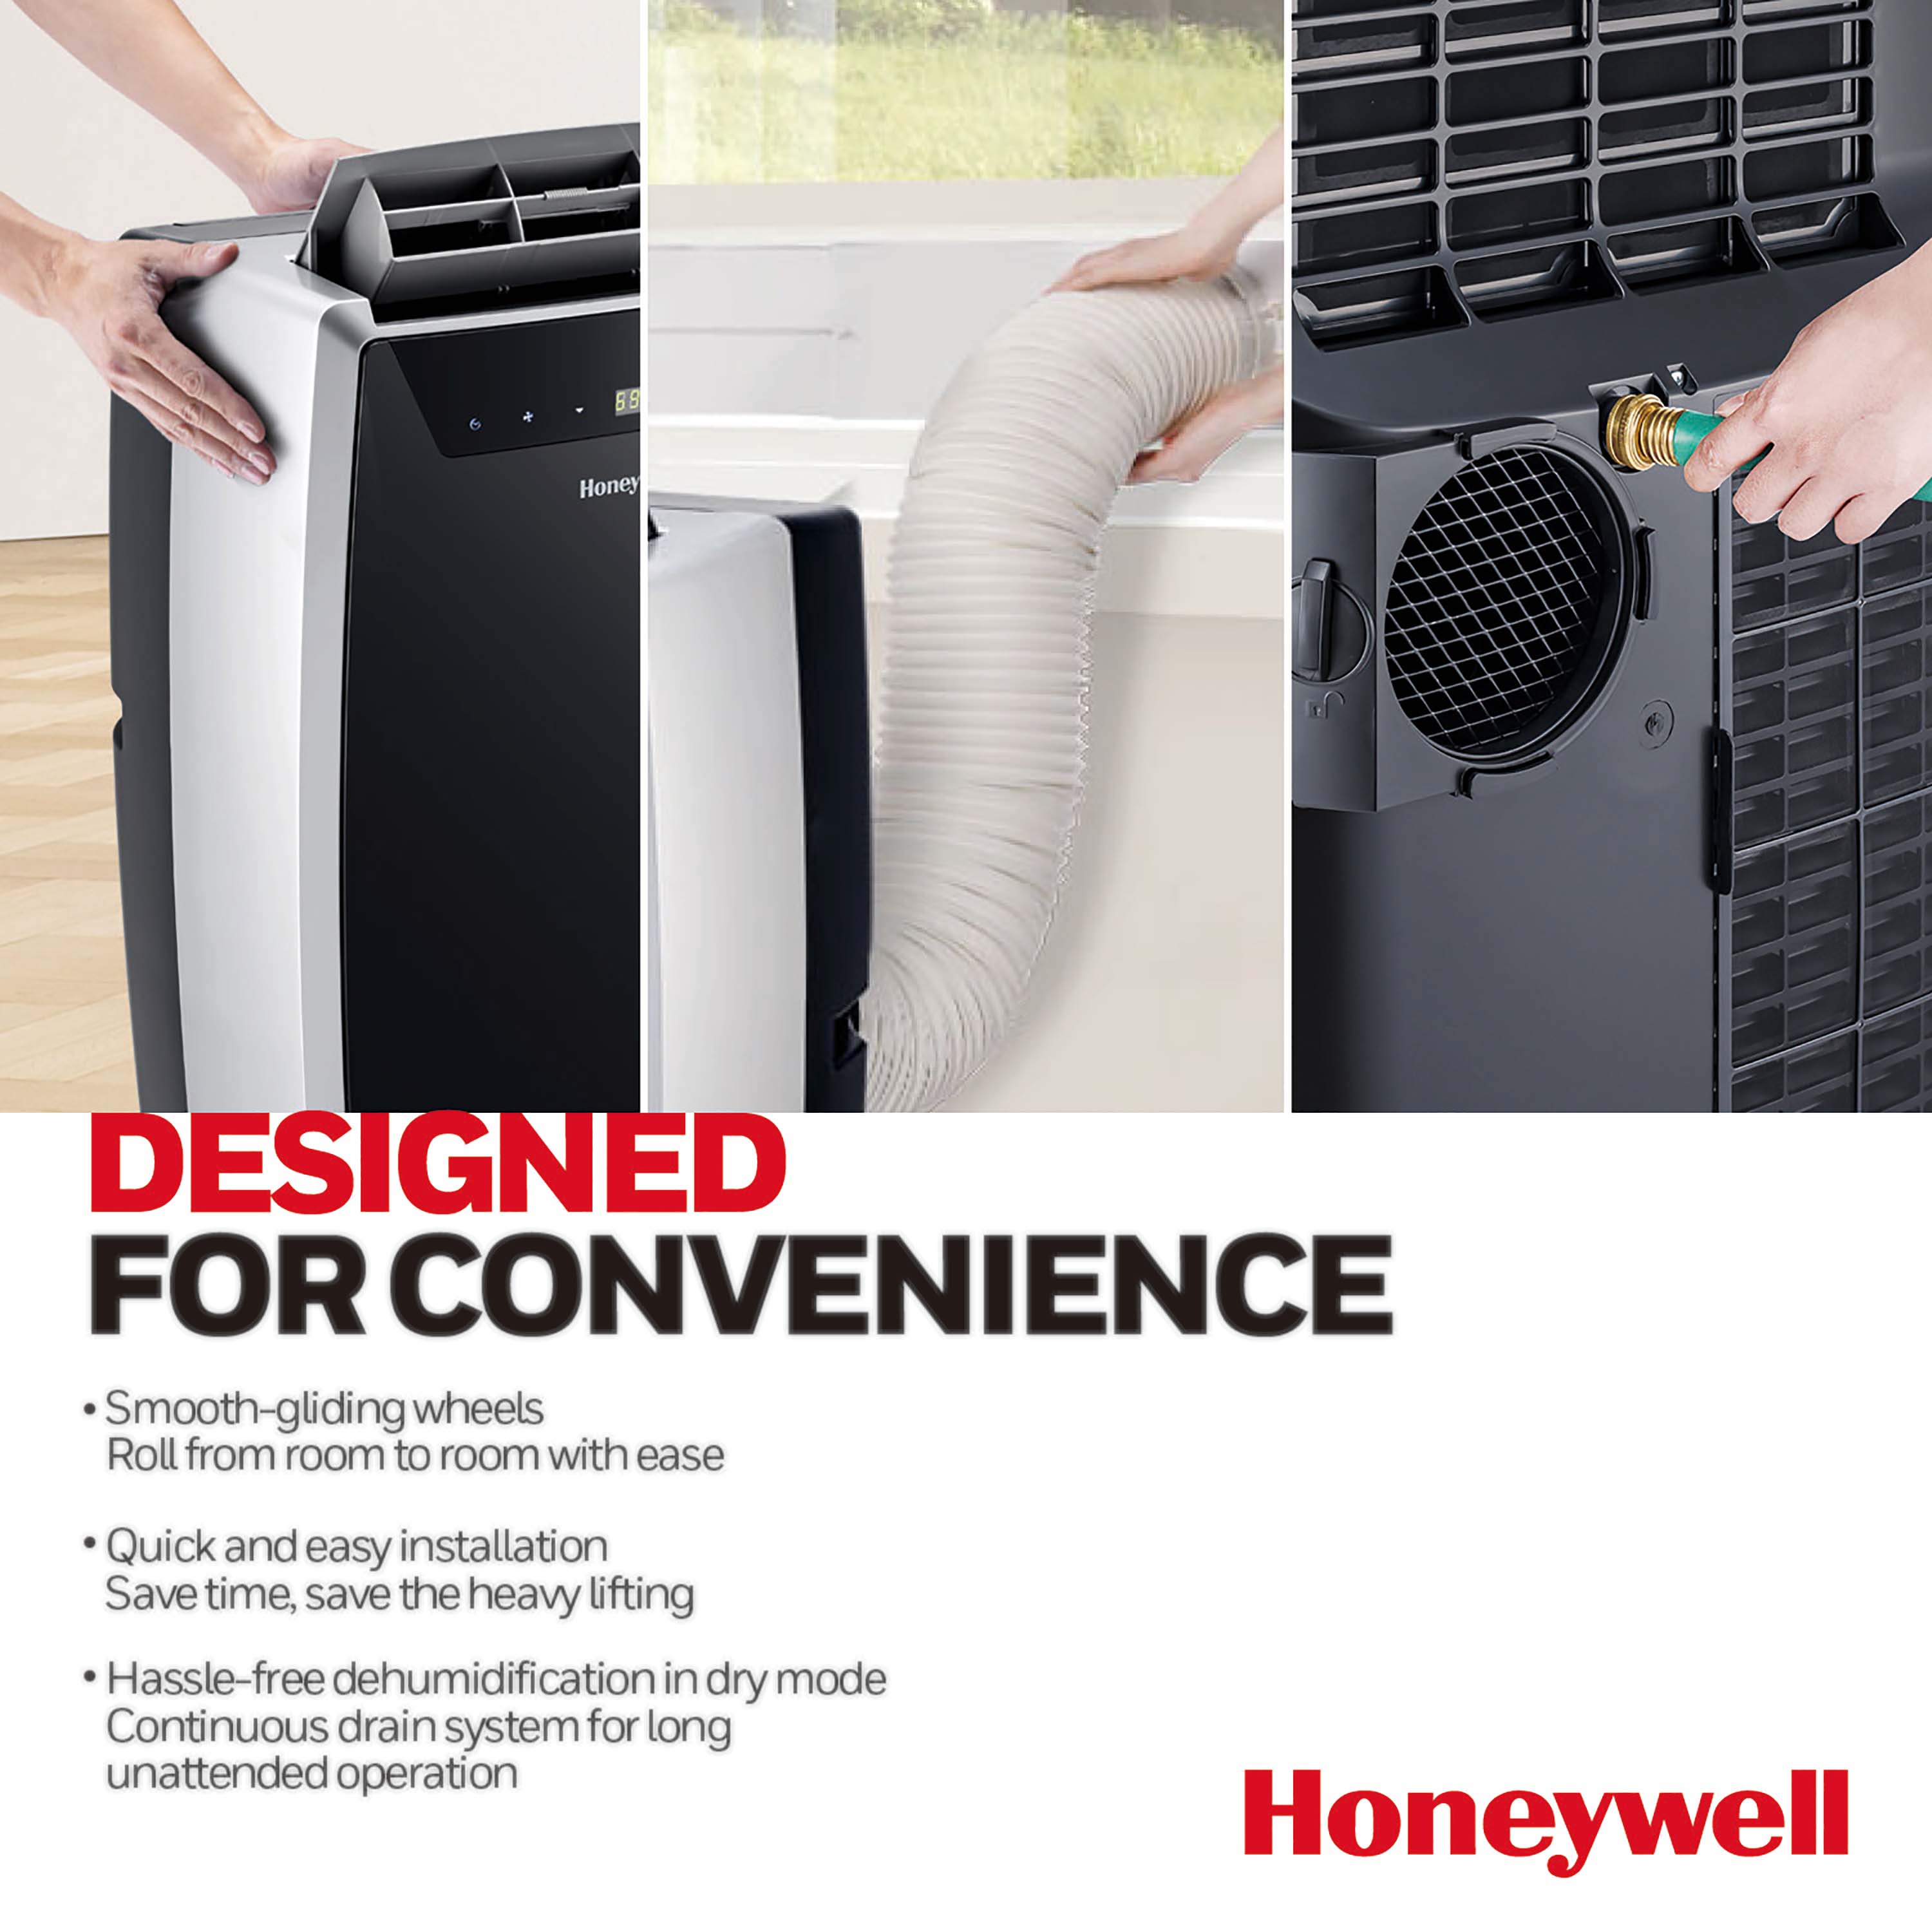 Honeywell 14,000 BTU Portable Air Conditioner, Dehumidifier and Fan - image 2 of 10